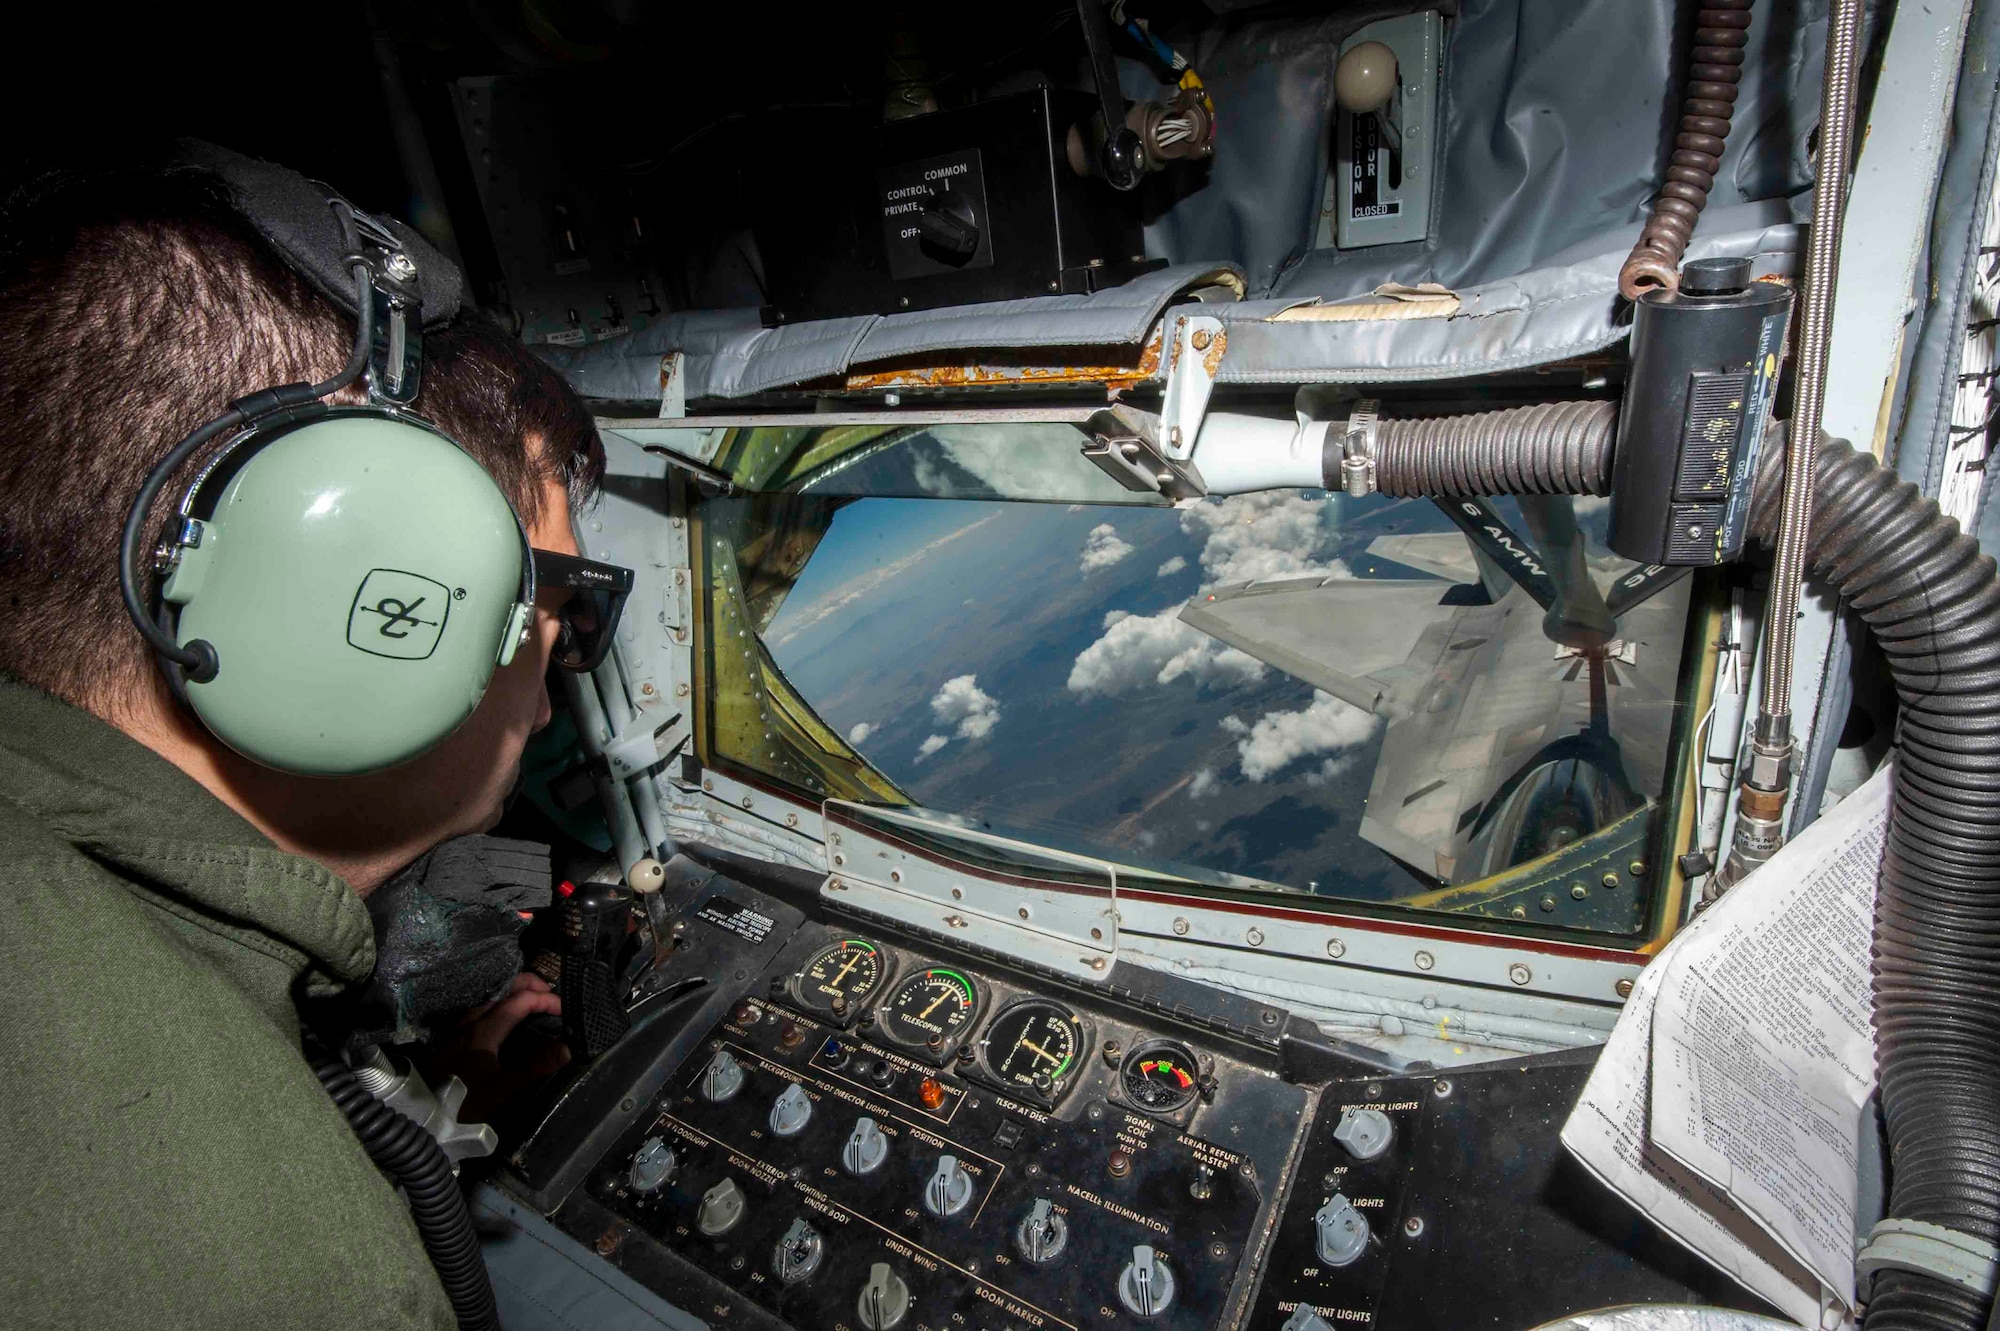 Senior Airman Eric Medina, 92nd Air Refueling Squadron boom operator, Fairchild Air Force Base, Wash., refuels an F-22 Raptor from Joint Base Langley-Eustis, Va., in a training sortie during Red Flag 16-3, July 21, 2016. During Red Flag, Medina is in charge of refueling aircraft that are participating in the exercise so they can continue the fight without having to return to Nellis AFB, Nev., for fuel. (U.S. Air Force photo by Senior Airman Jake Carter/Released)